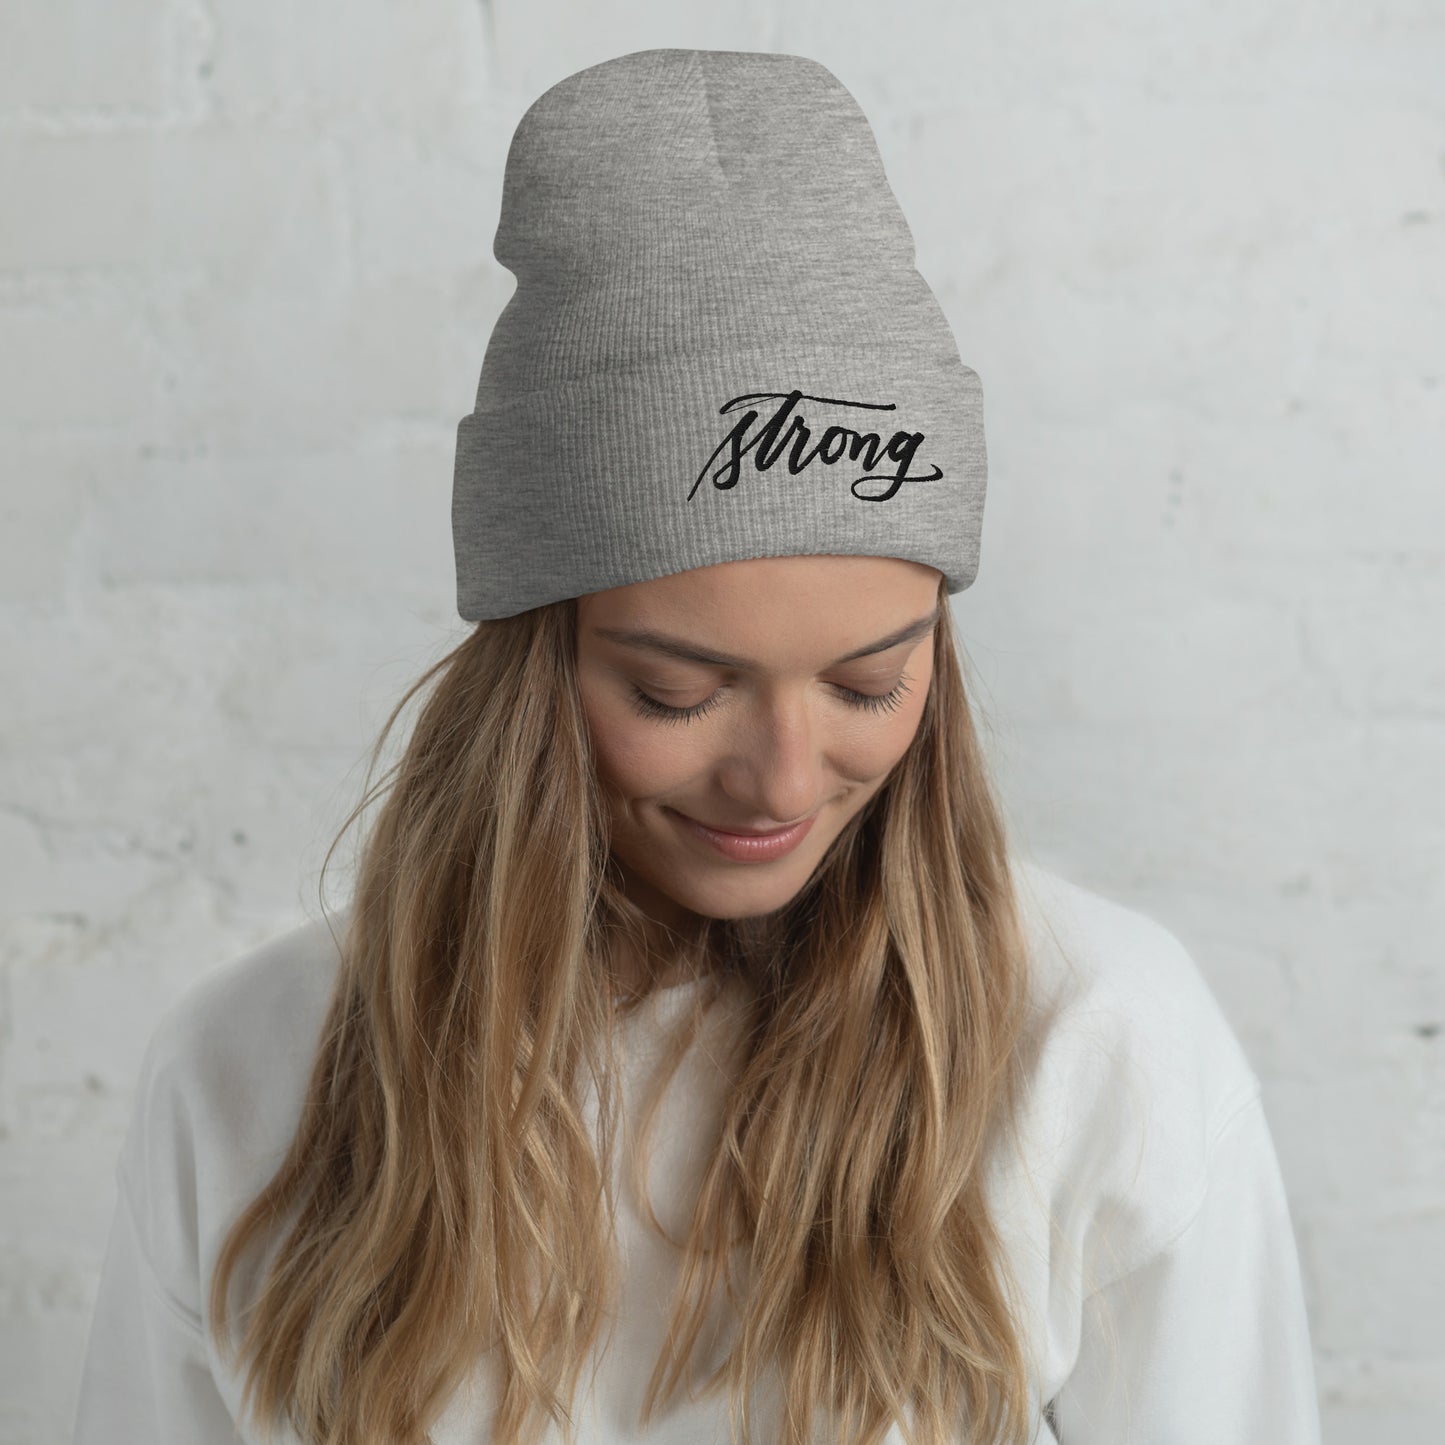 Embroidered Black Script "Strong" Calligraphy on Black or Grey Cuffed Beanie